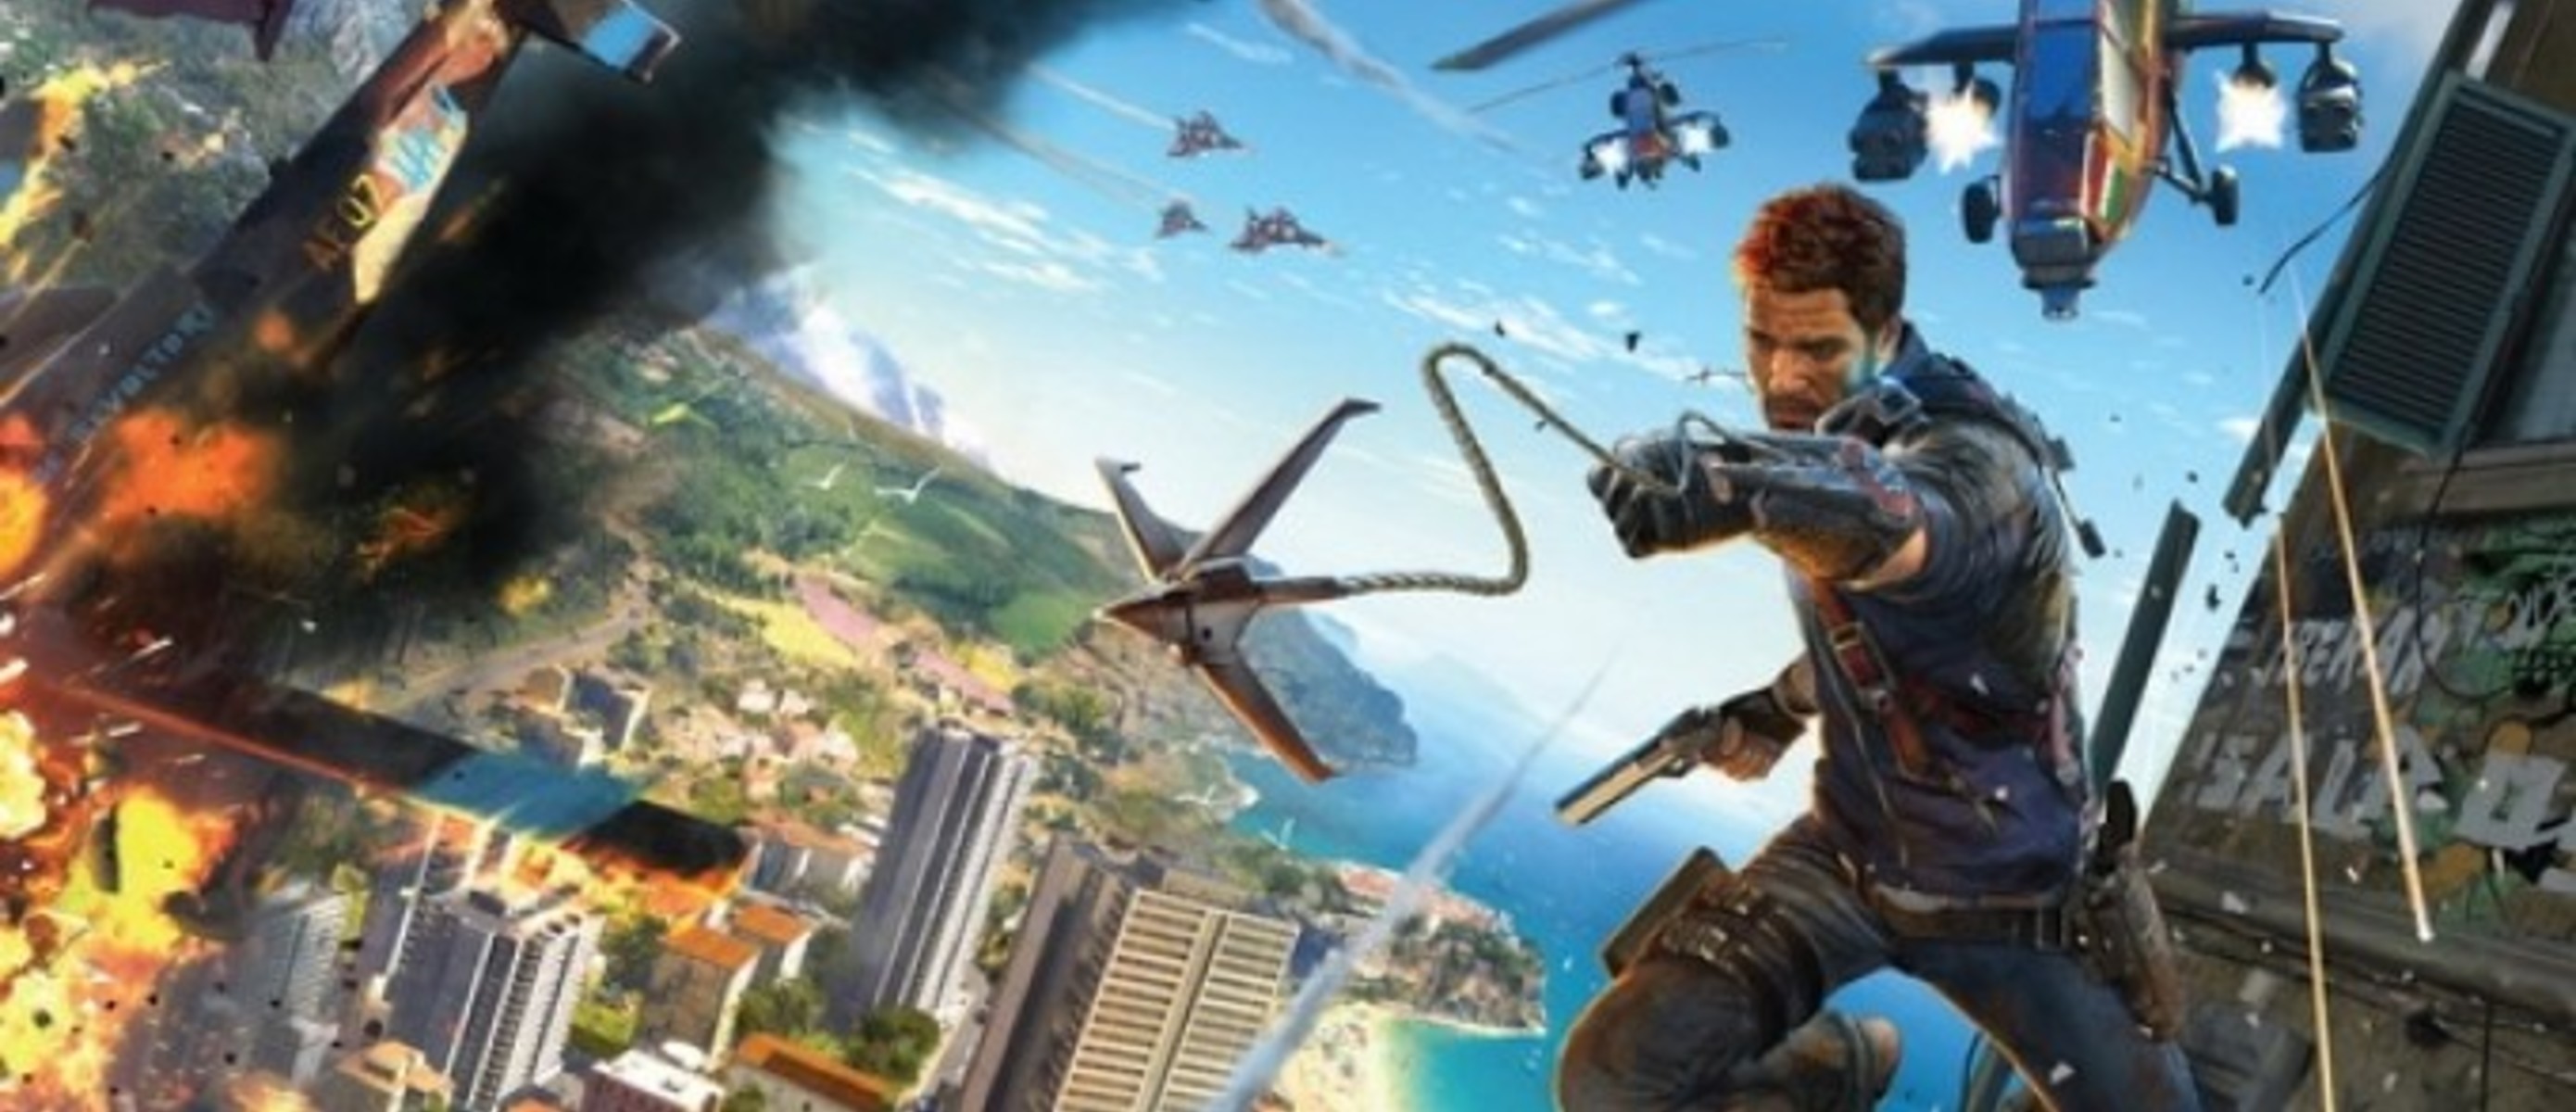 This is just a game. Игра just cause 3. Игра just cause 4. Just cause 1. Just cause 3 ps4.